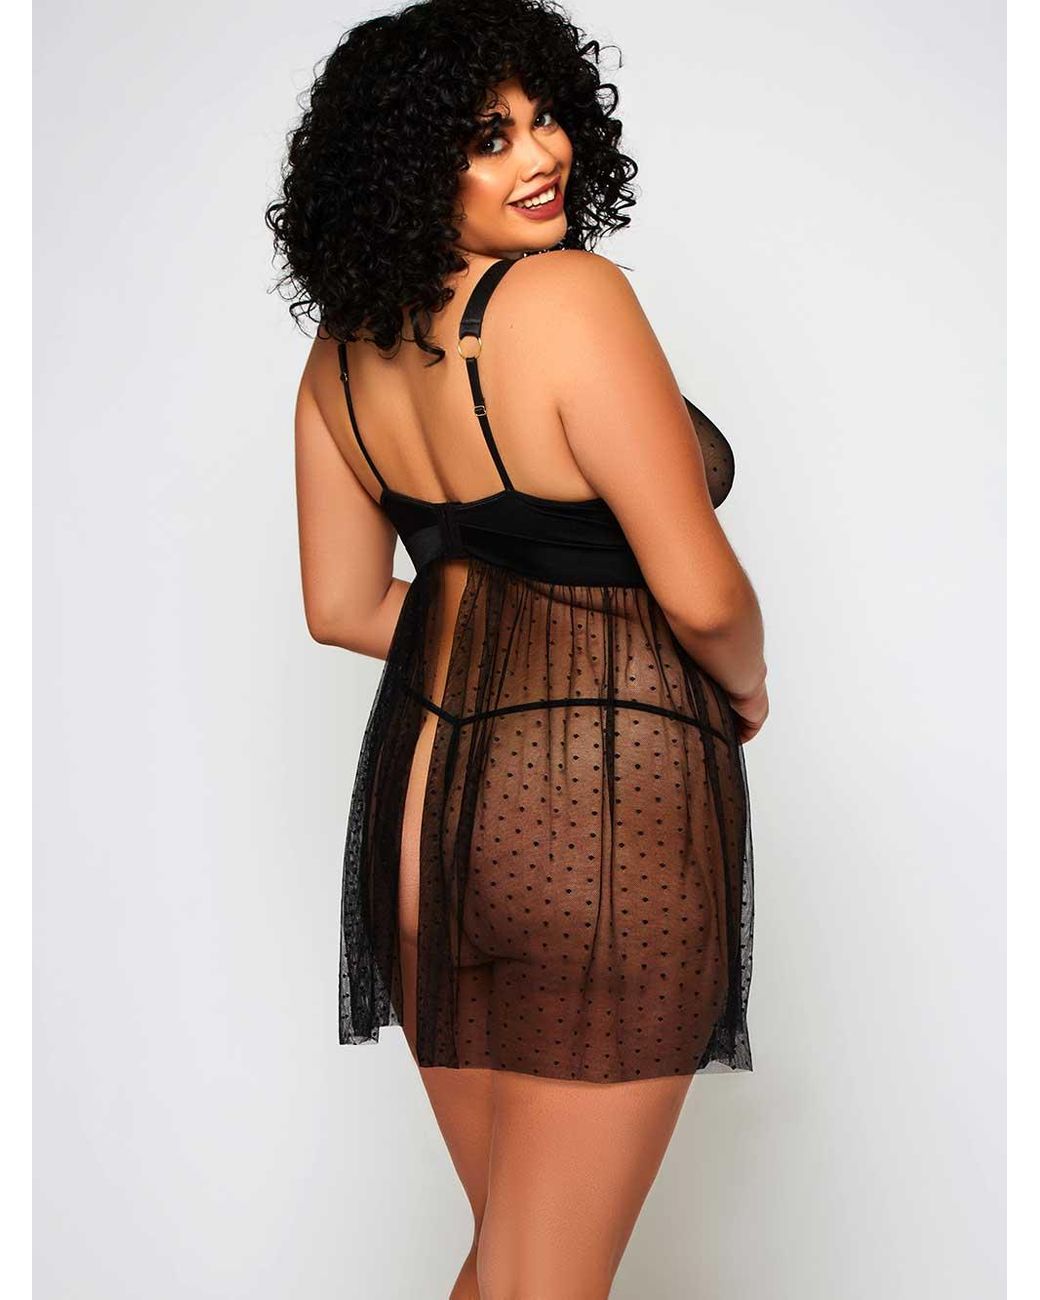 iCollection Kimberley Plus Size Babydoll in Black | Lyst